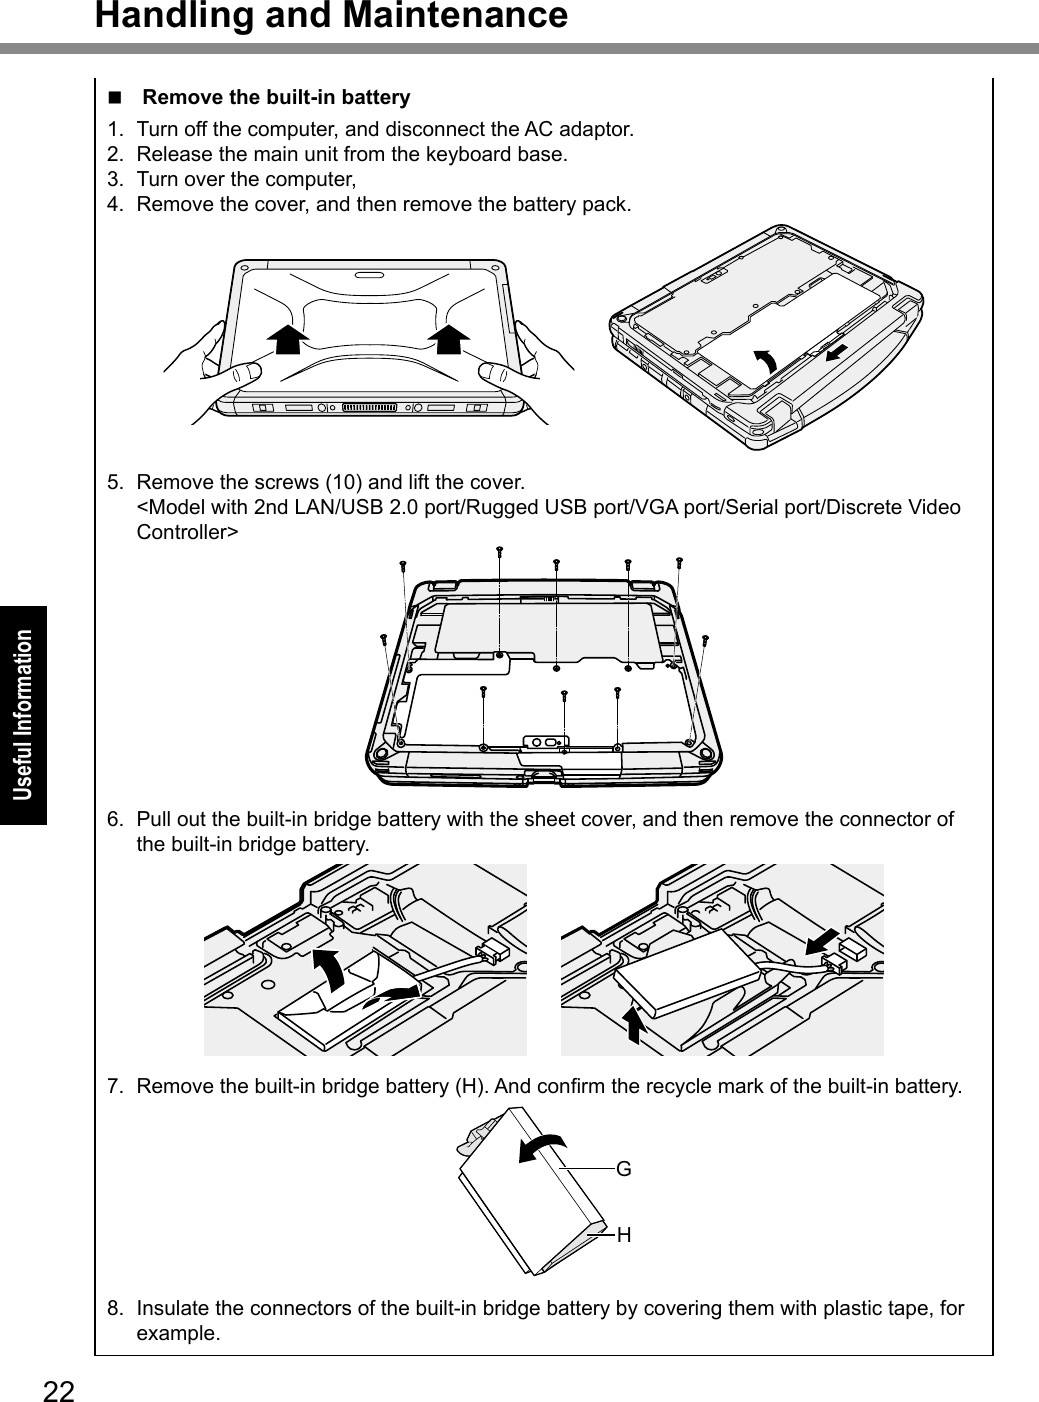 22Useful InformationHandling and Maintenancen Remove the built-in battery1.  Turn off the computer, and disconnect the AC adaptor.2.  Release the main unit from the keyboard base.3.  Turn over the computer,4.  Remove the cover, and then remove the battery pack.5.  Remove the screws (10) and lift the cover. &lt;Model with 2nd LAN/USB 2.0 port/Rugged USB port/VGA port/Serial port/Discrete Video Controller&gt;6.  Pull out the built-in bridge battery with the sheet cover, and then remove the connector of the built-in bridge battery.7. Removethebuilt-inbridgebattery(H).Andconrmtherecyclemarkofthebuilt-inbattery.GH8.  Insulate the connectors of the built-in bridge battery by covering them with plastic tape, for example.